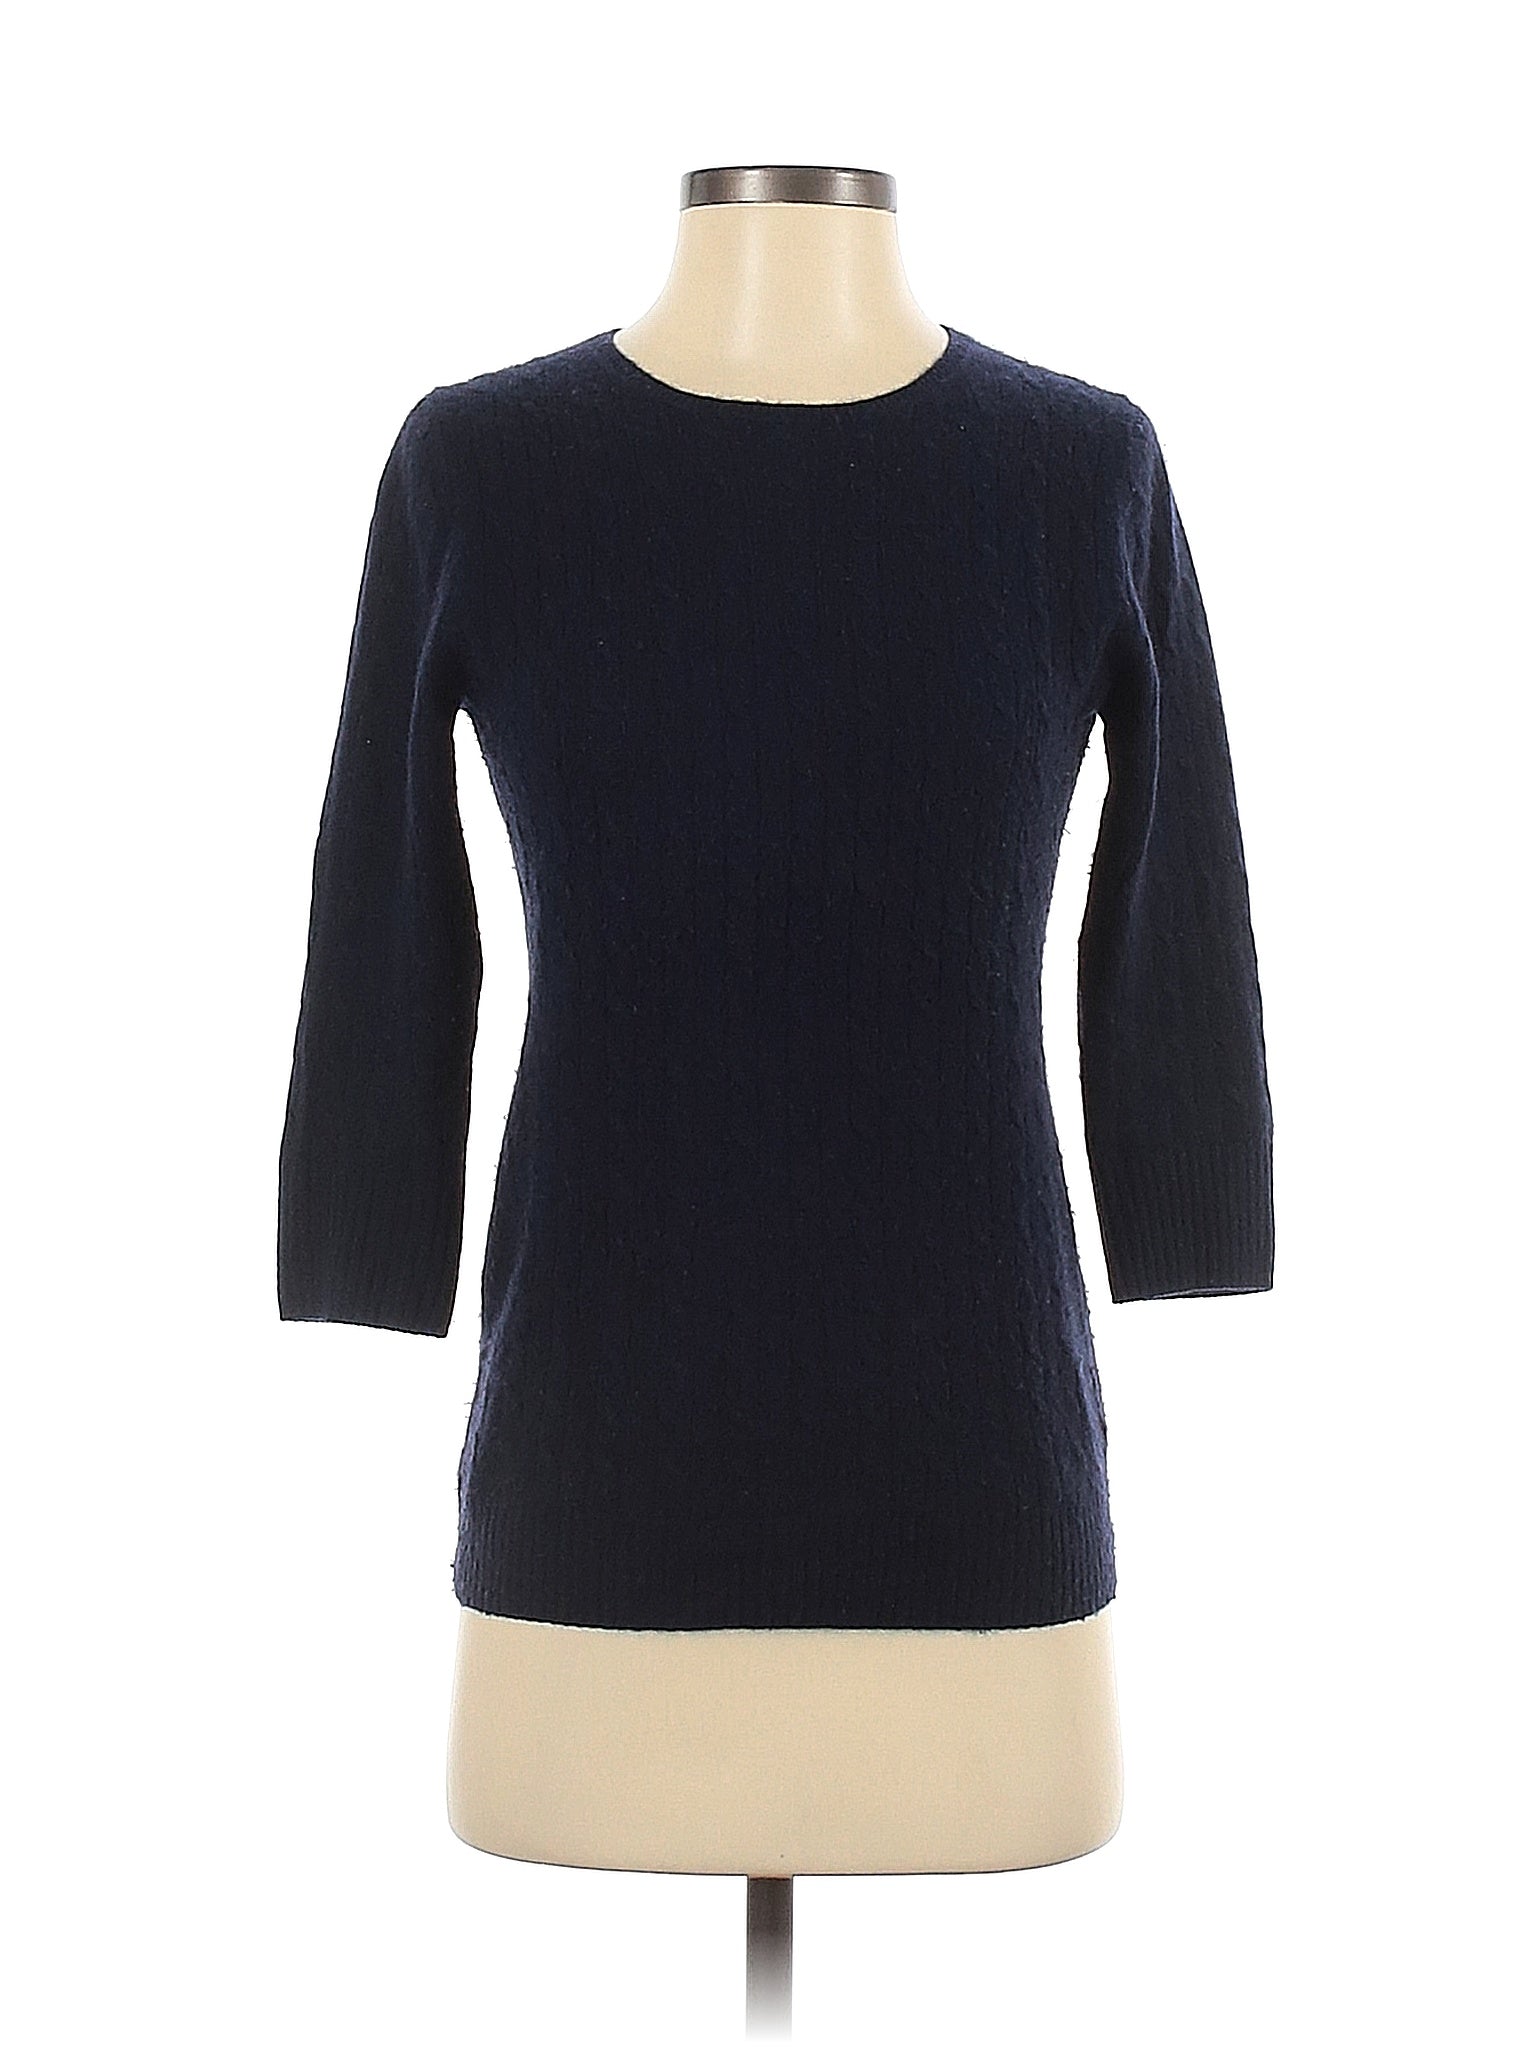 Cashmere Pullover Sweater size - S